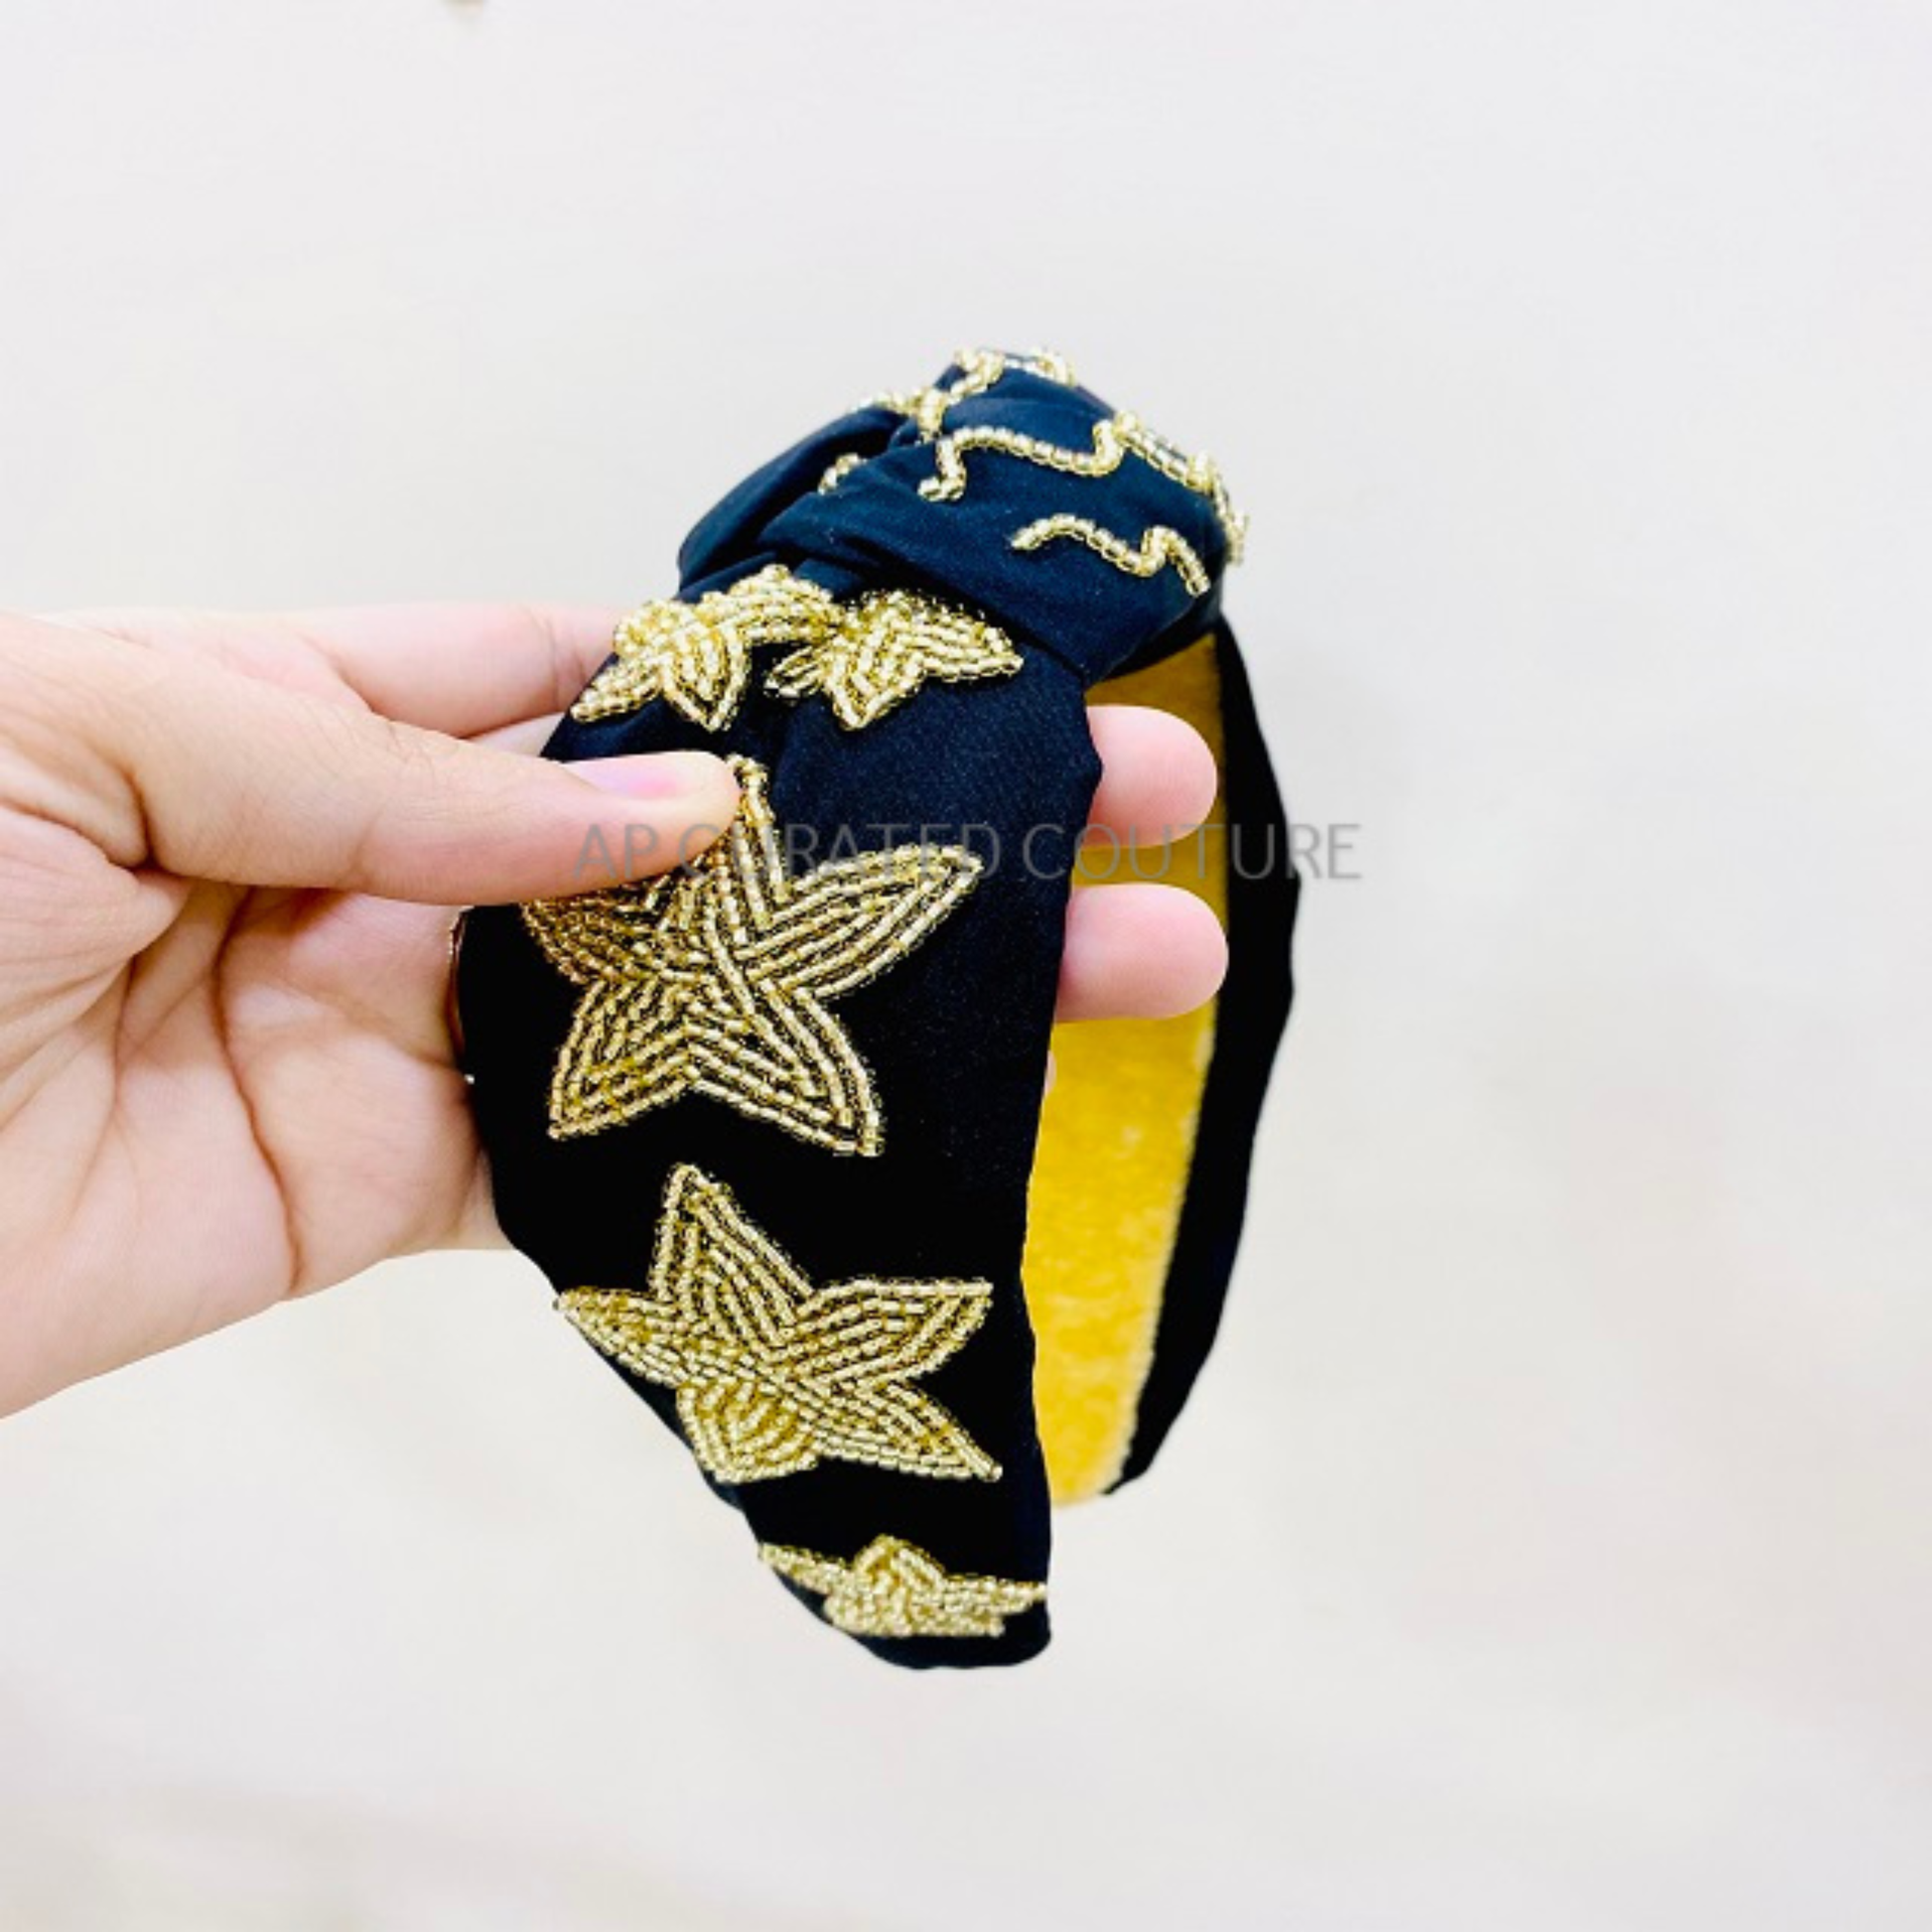 A person wearing a Bash New Orleans Football Headband with Black and Gold Stars, excited for game day.